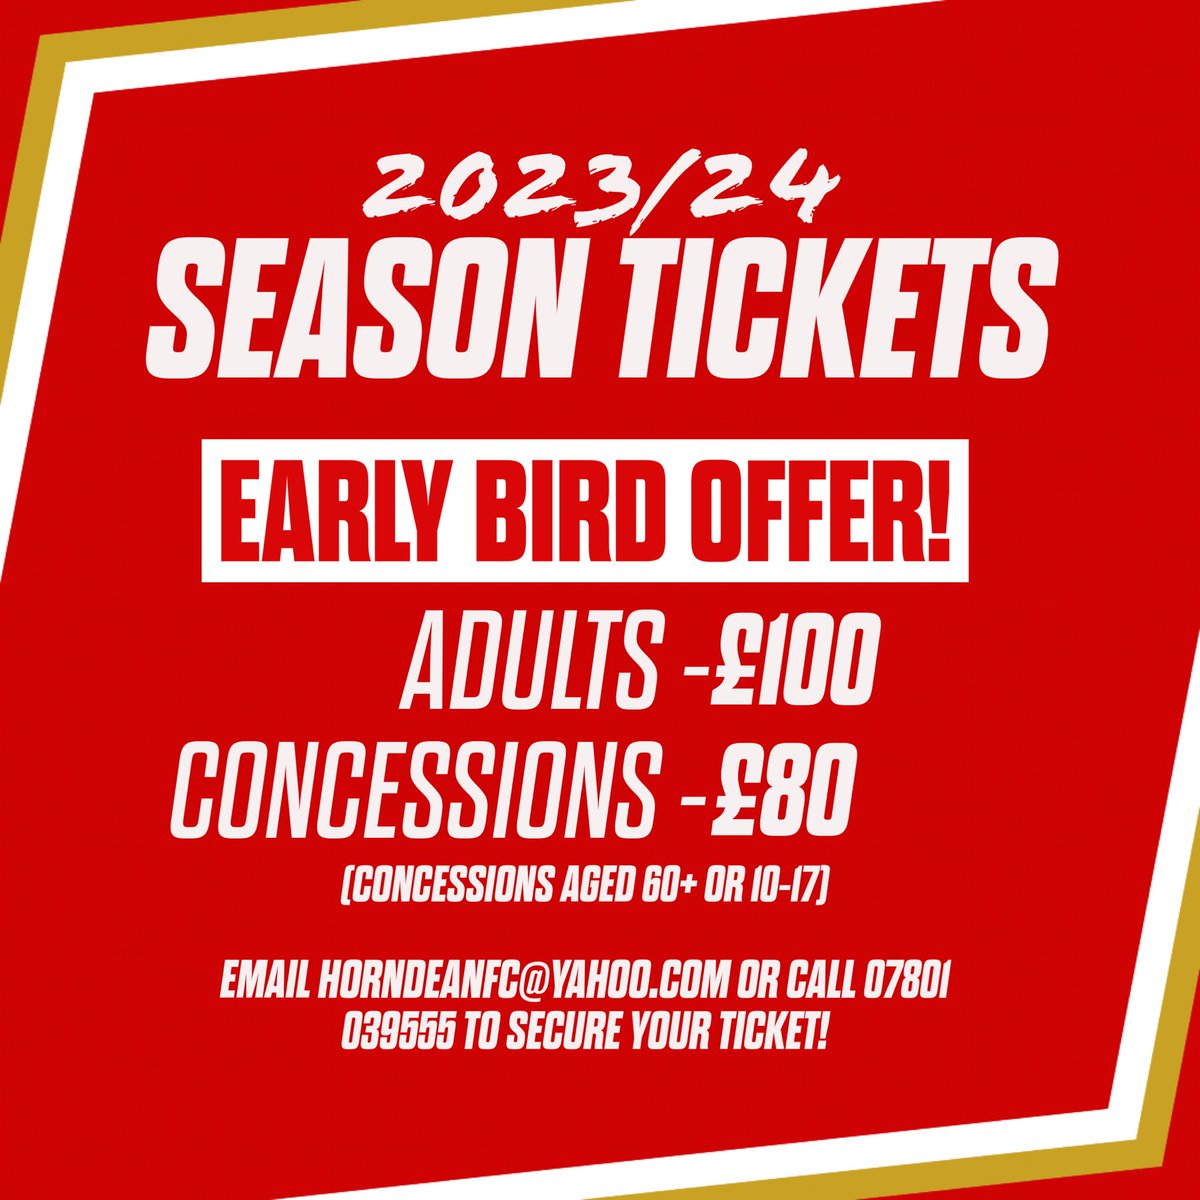 🎟️ 𝙂𝙀𝙏 𝘽𝙀𝙃𝙄𝙉𝘿 𝙏𝙃𝙀 𝘿𝙀𝘼𝙉𝙎!

Take advantage of our early bird offer and secure your season ticket for the 2023/24 Season!

Head over to our website for more info👇🏻
horndeanfc.co.uk/news/2023-24-e…

#UpTheDeans